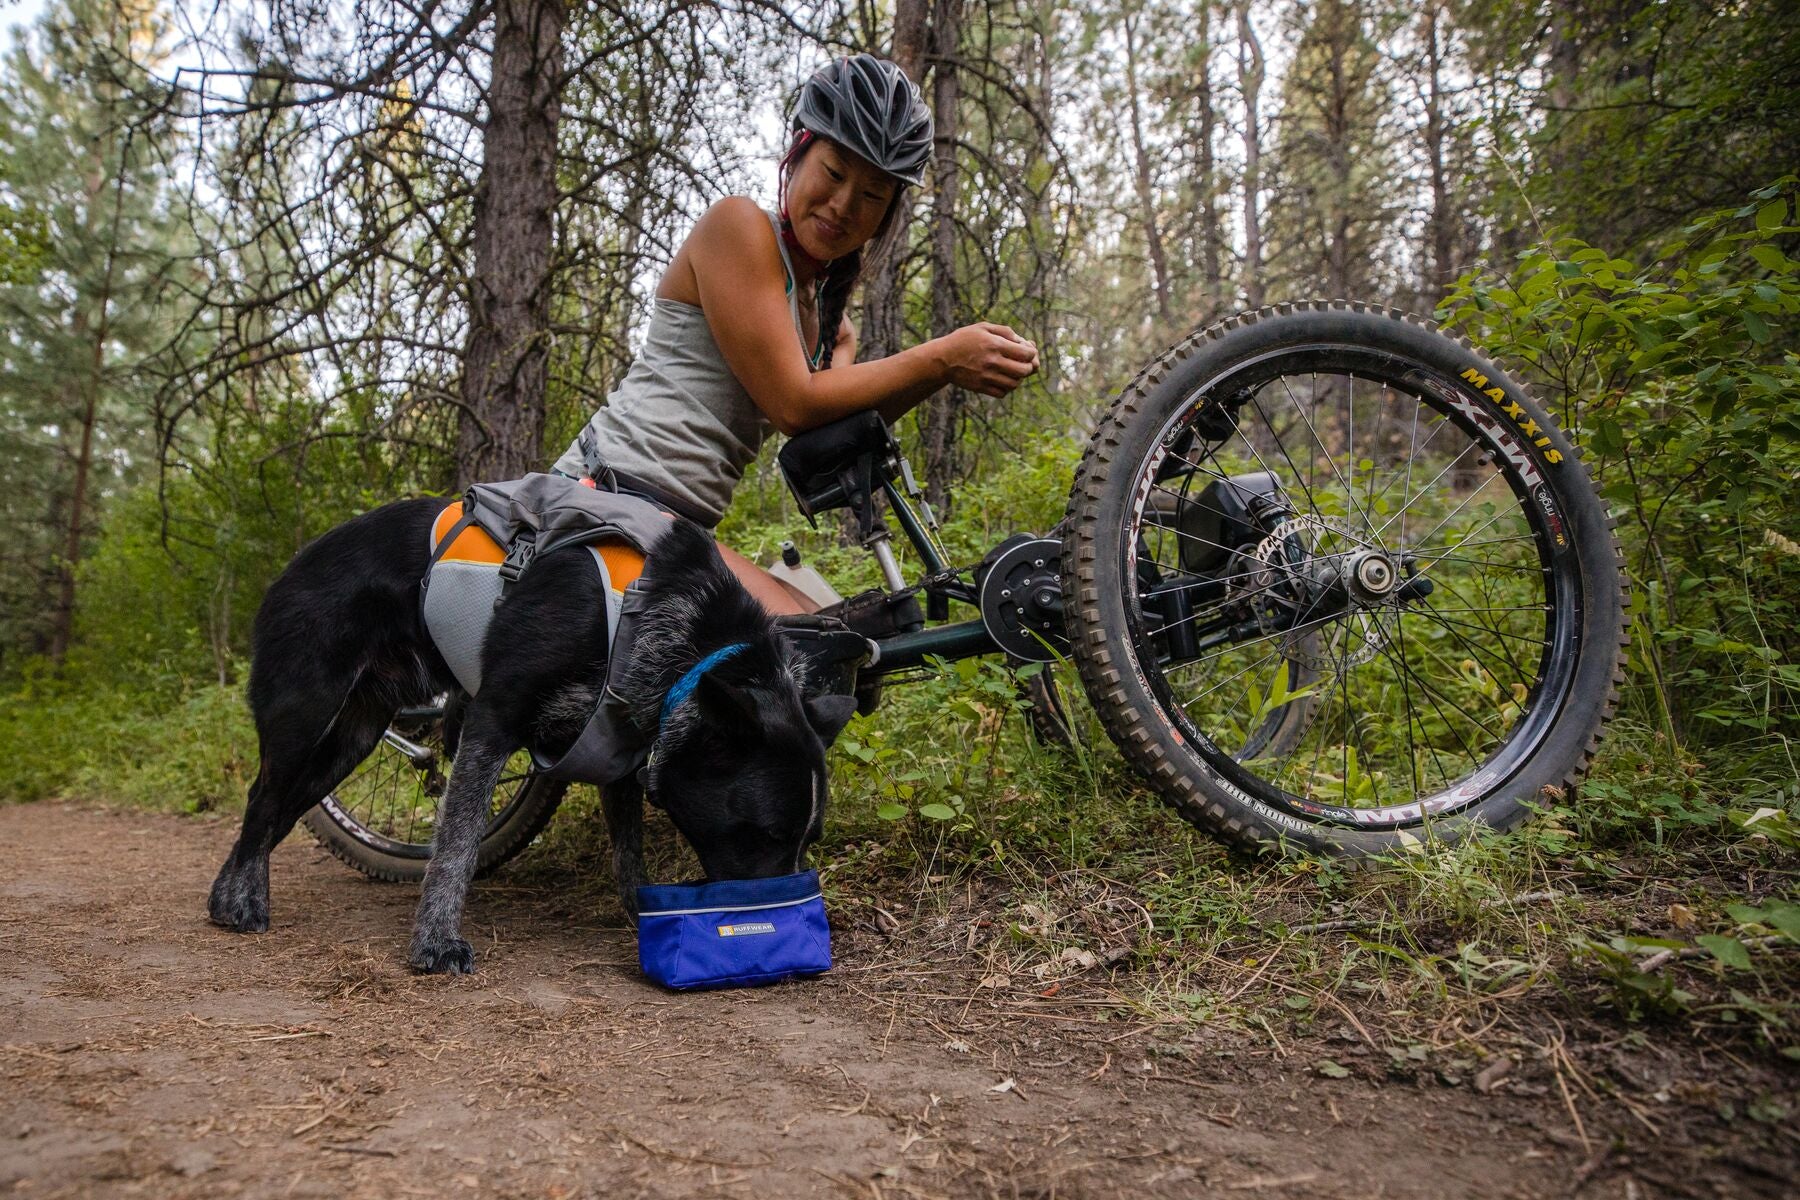 Adaptive athlete on a off road handcycle on trail while dog Bernie drinks out of quencher dog bowl at her side.